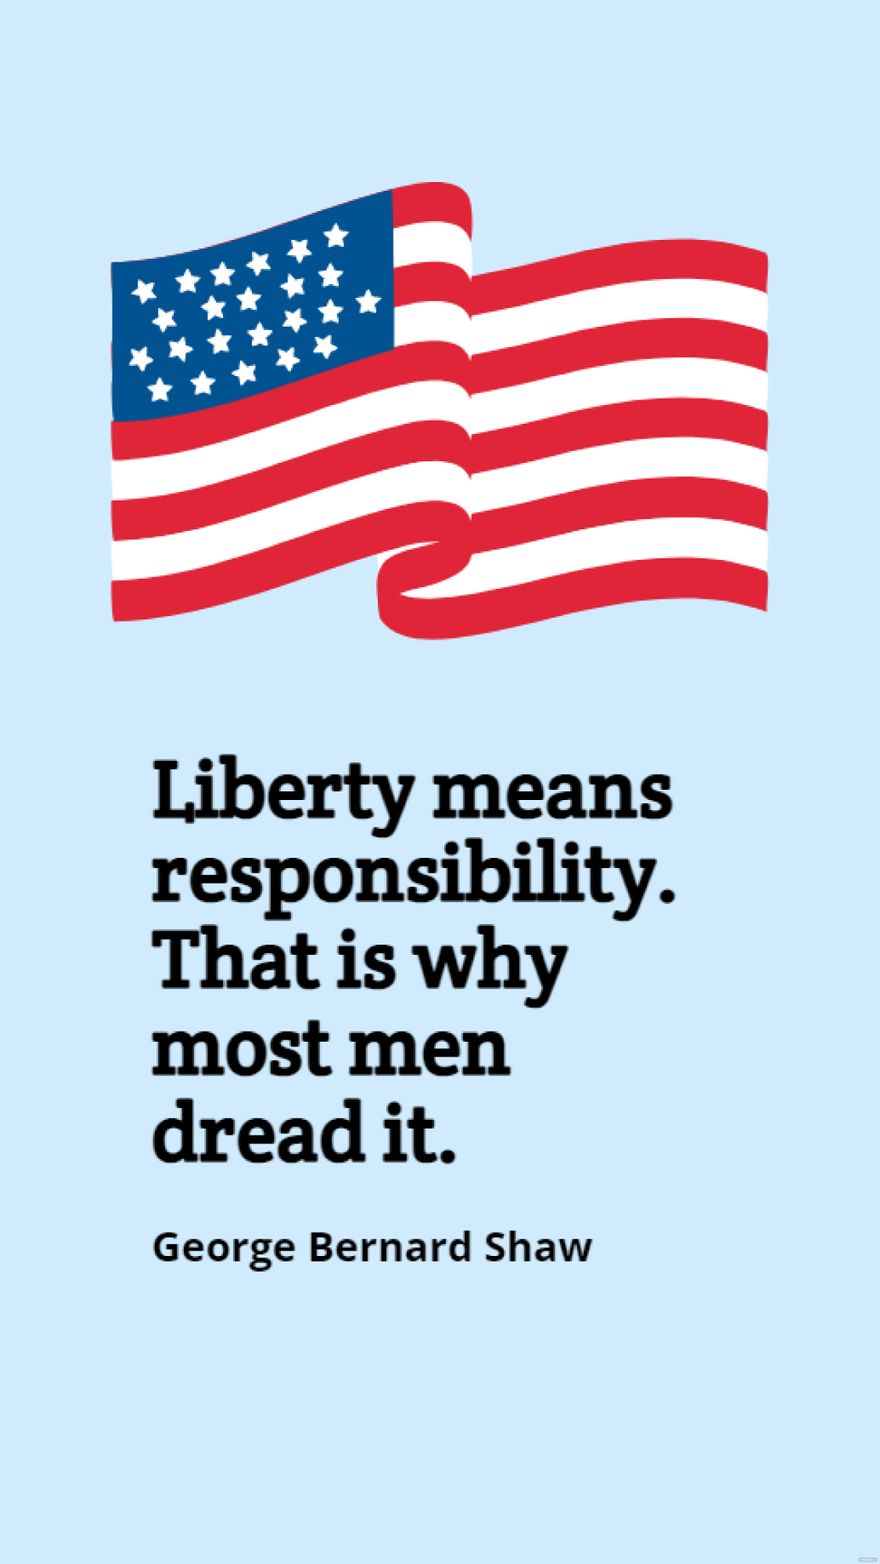 Free George Bernard Shaw - Liberty means responsibility. That is why most men dread it. in JPG